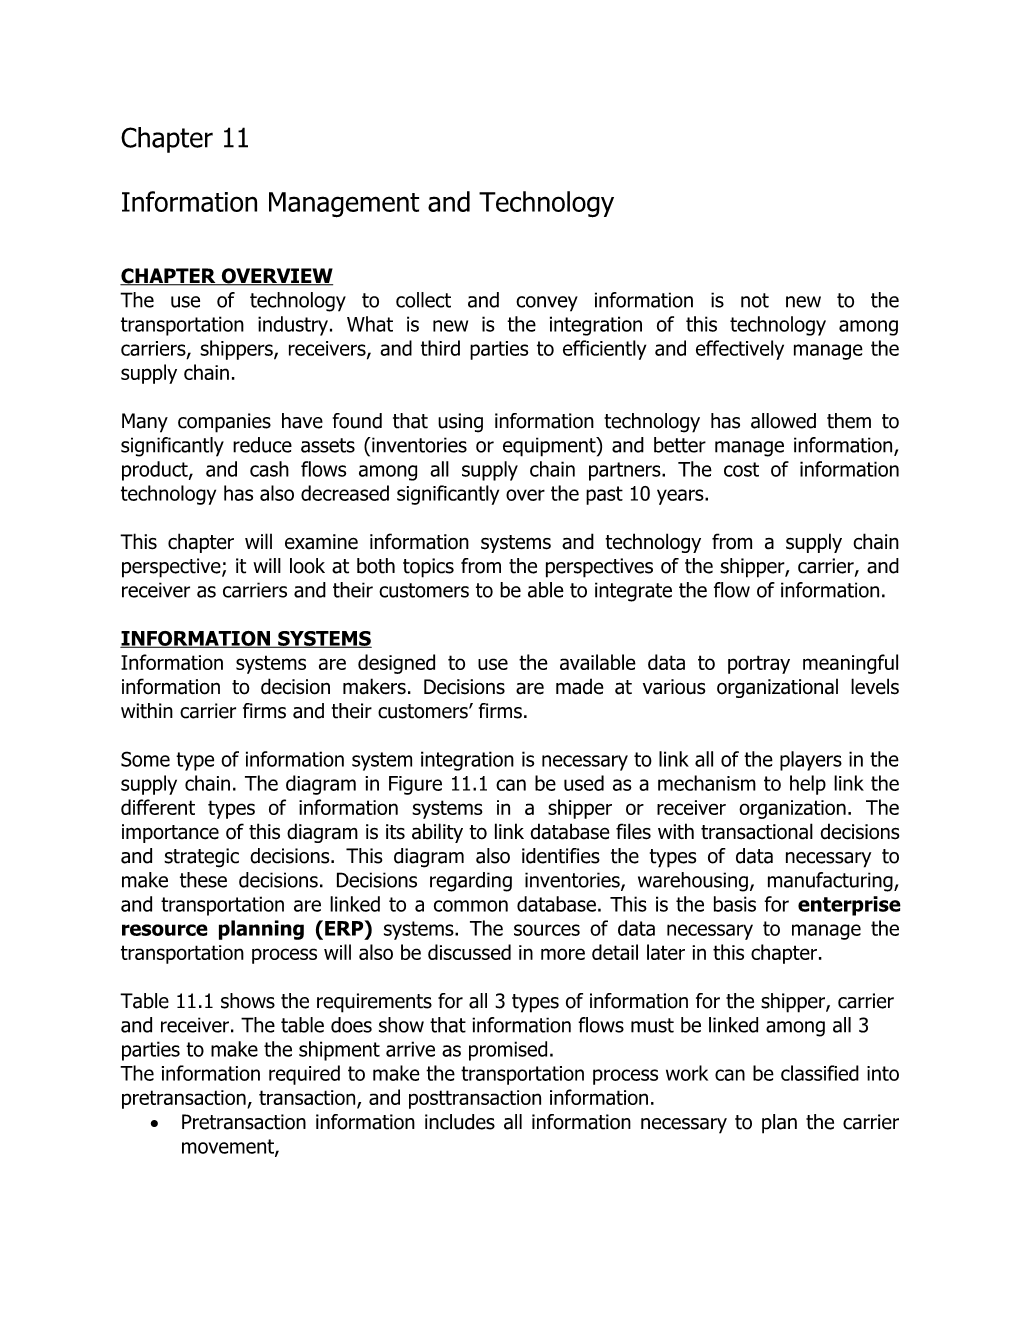 Information Management and Technology